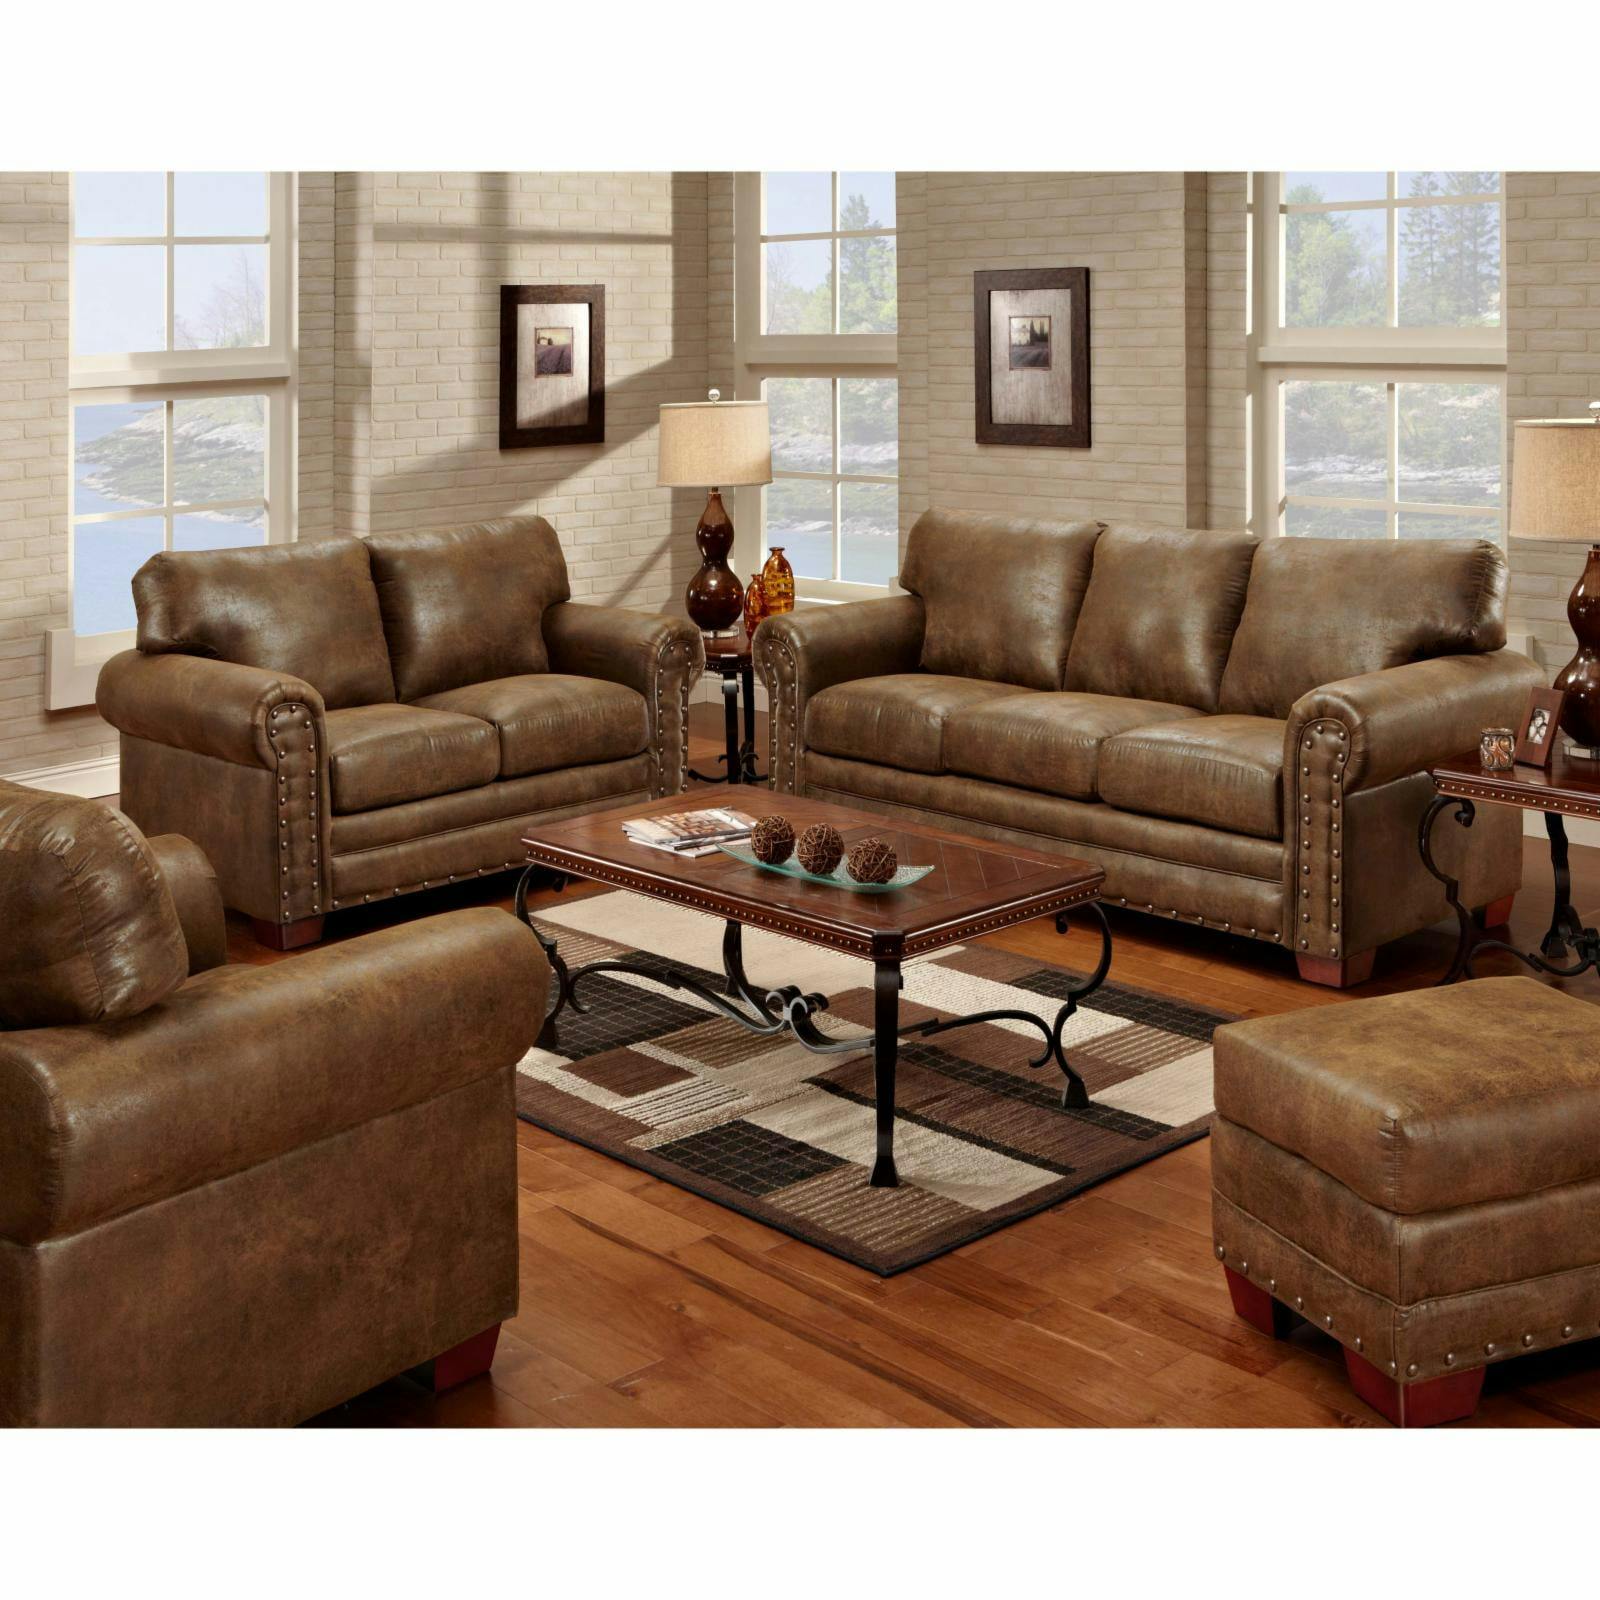 Buckskin Brown Faux Leather Sofa Set with Ottoman and Nailhead Accents